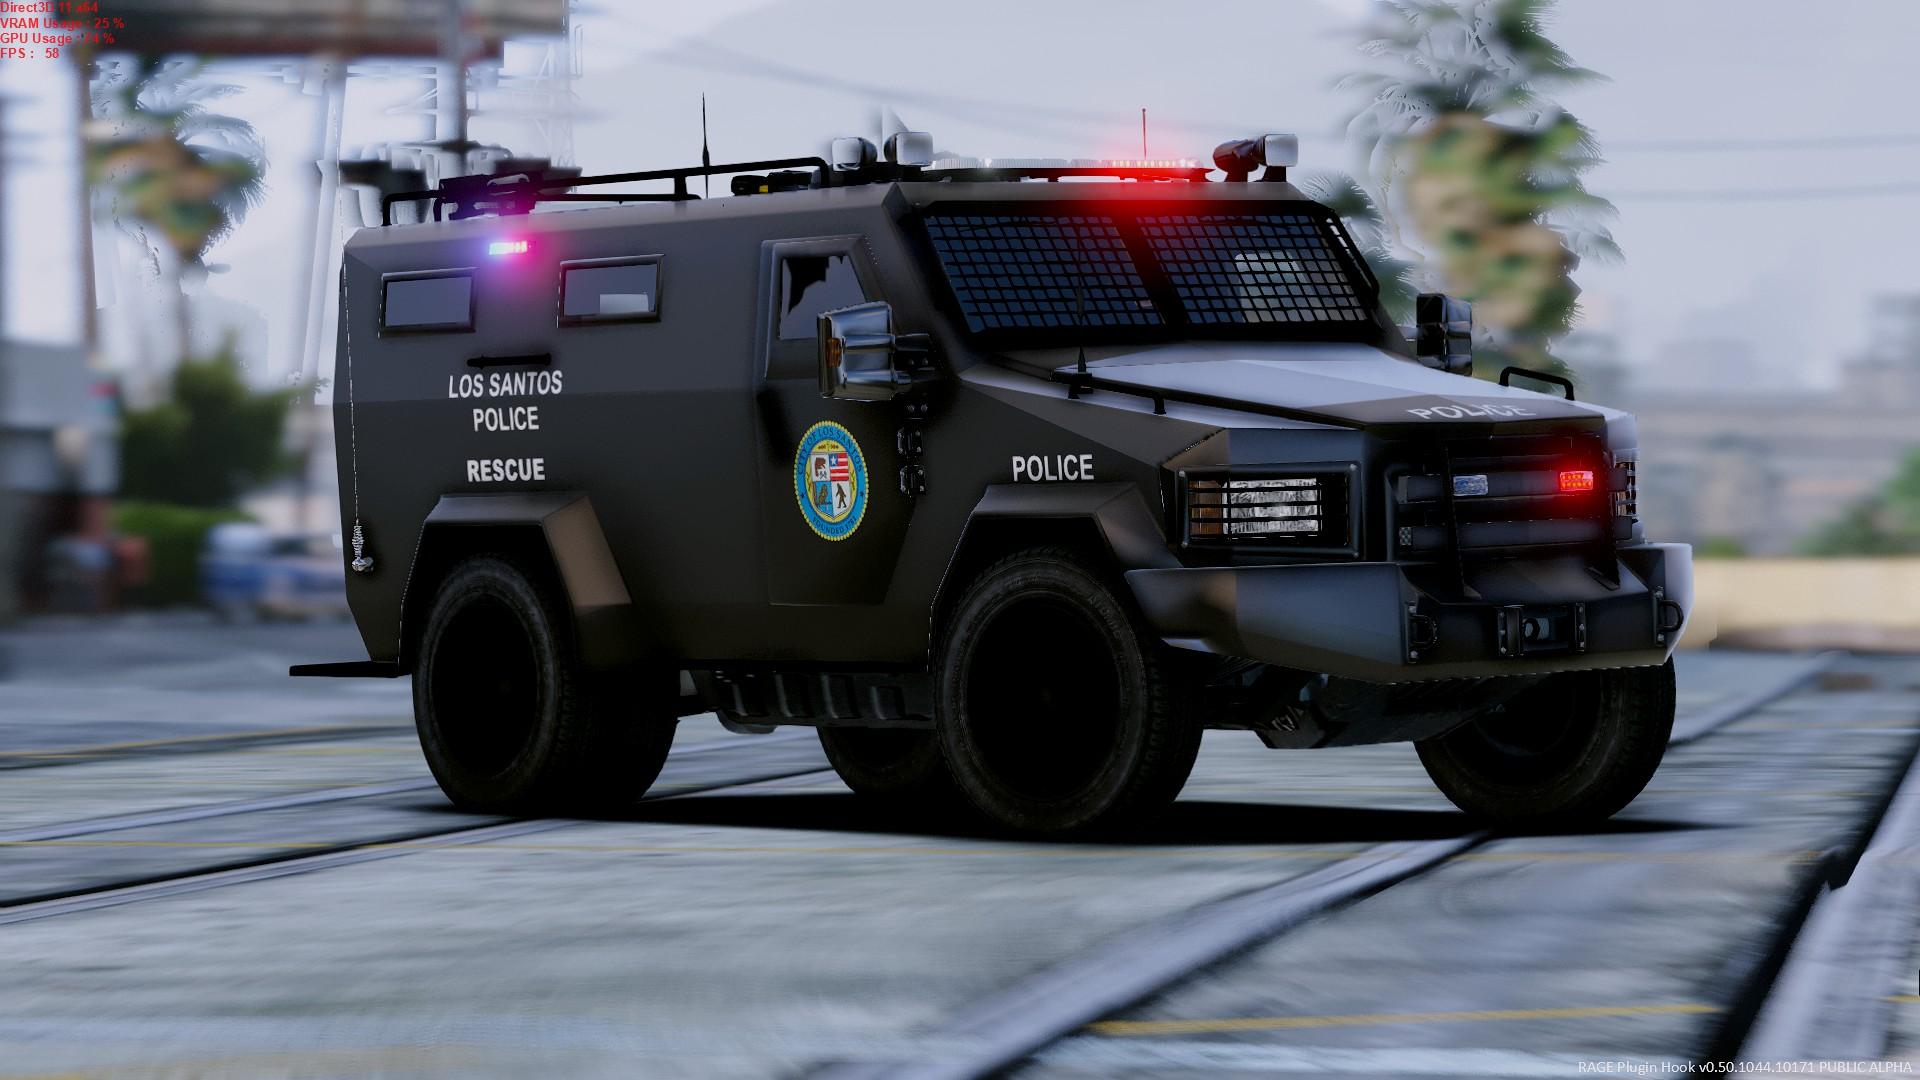 New Lspd Lapd Skin Pack Gta 5 Mods - Bank2home.com